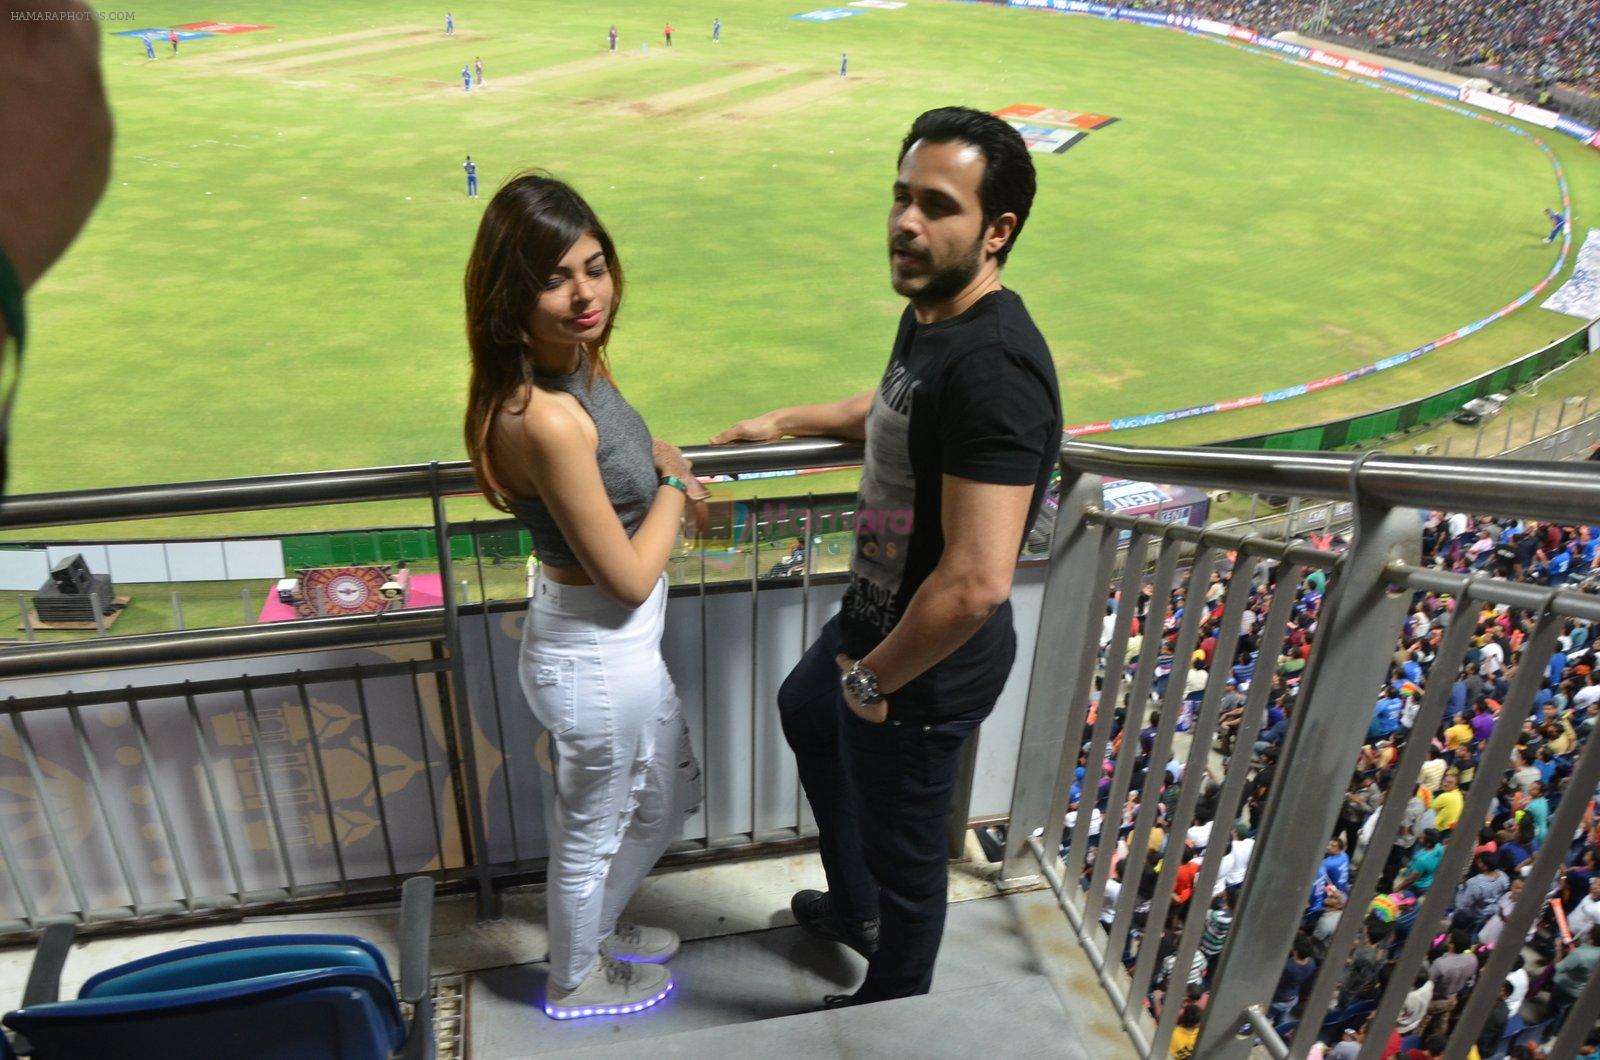 christina bharwani with emran hashmi at Azhar promotions in association with Gourmet Renaissance at IPL match in Pune on 9th May 2016